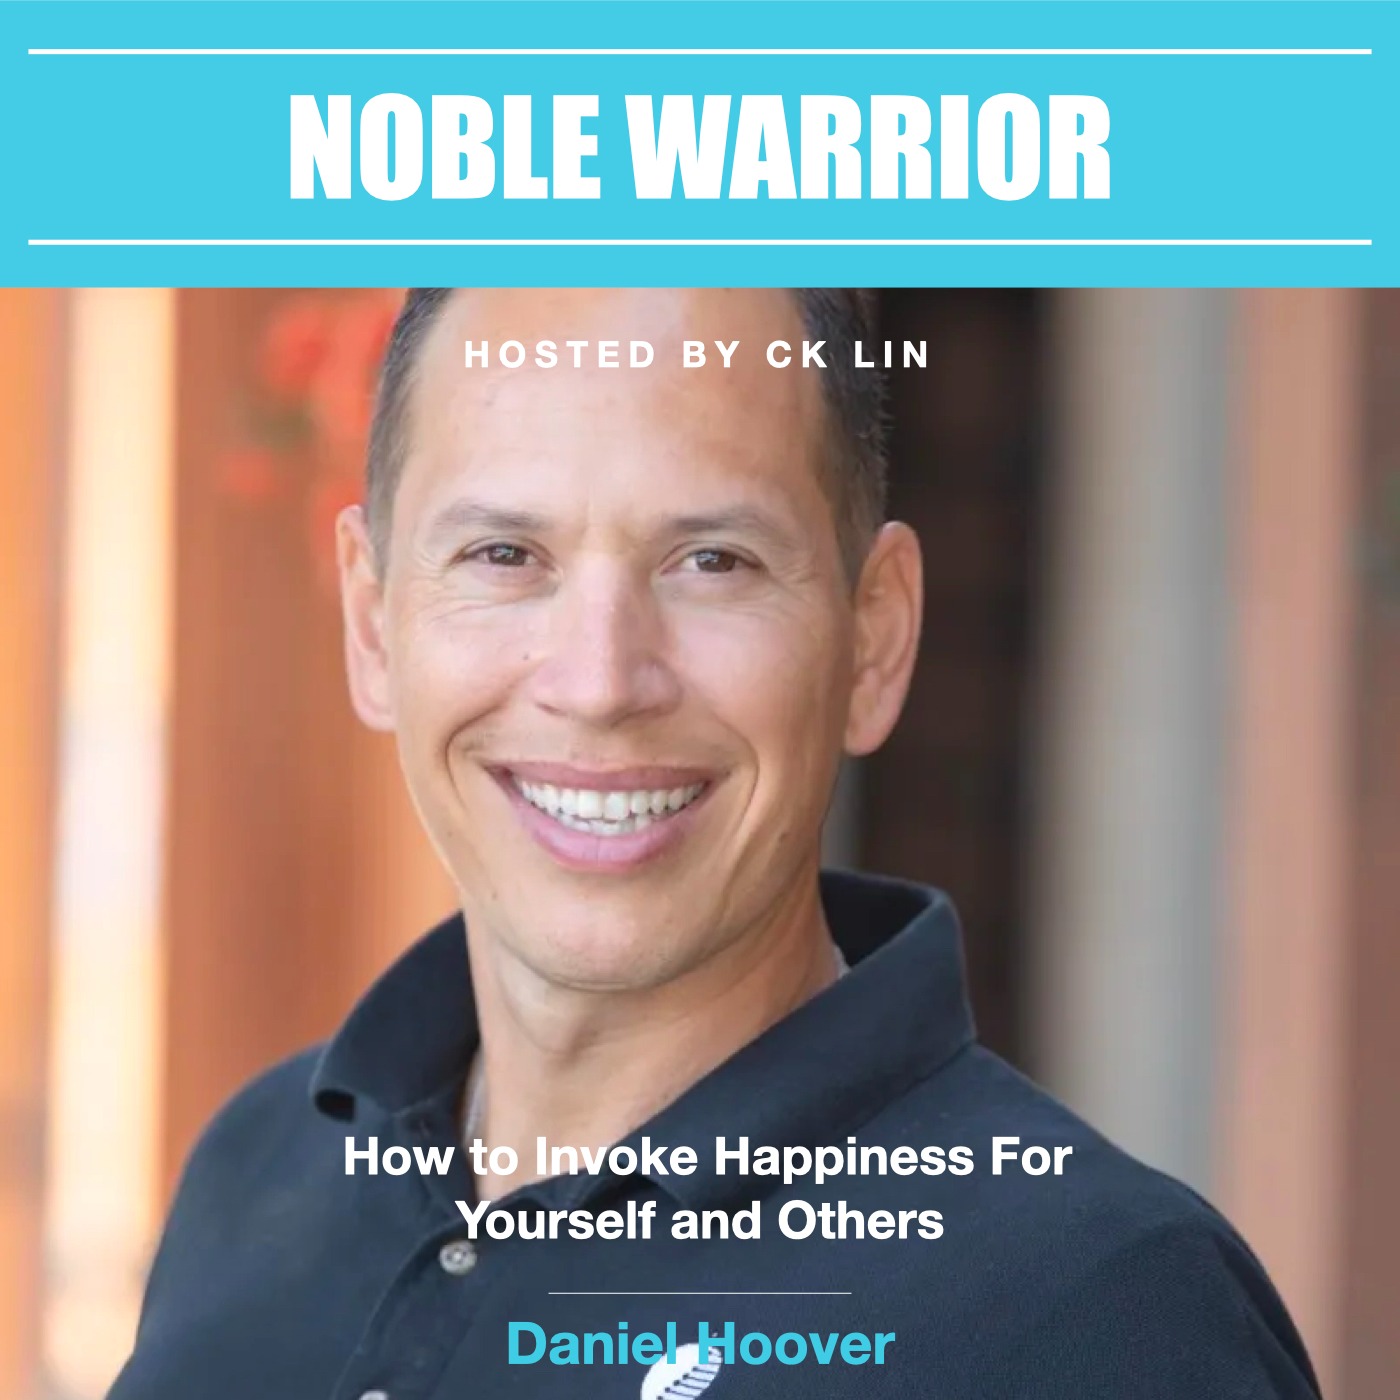 018 How to Invoke Happiness For Yourself and Others - Dr. Daniel Hoover